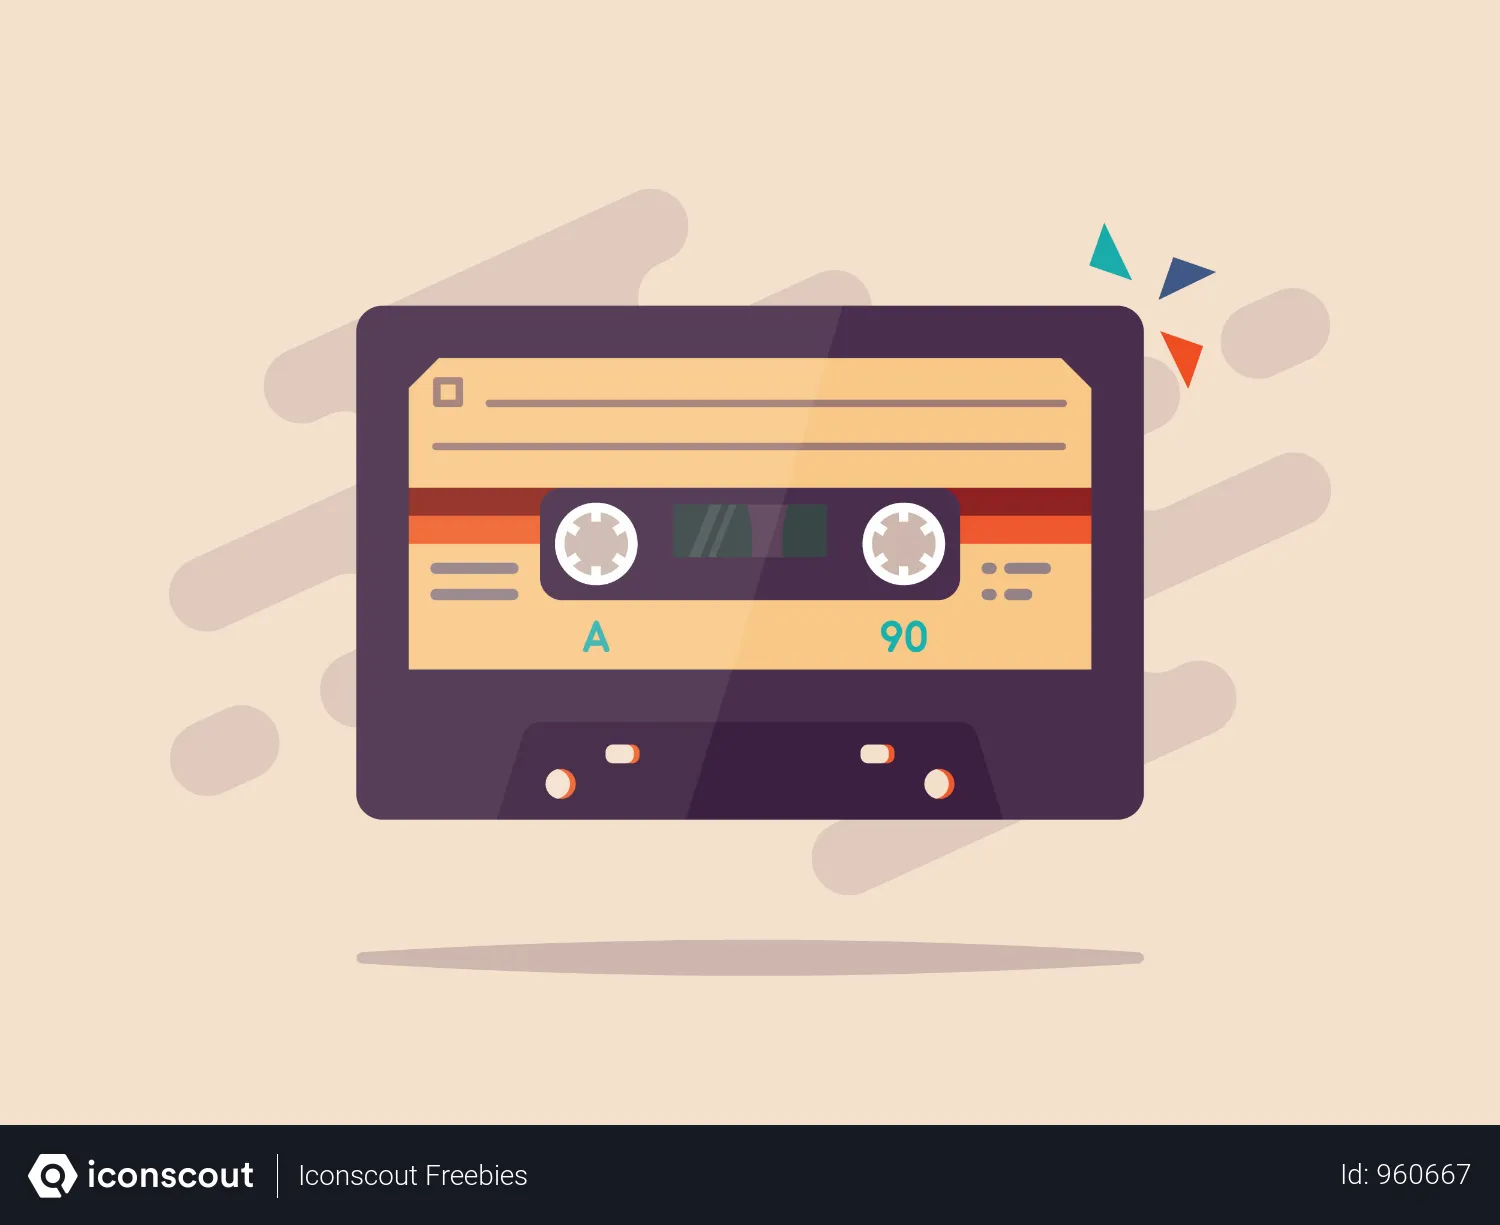 Best Free Retro Tape Illustration download in PNG & Vector format